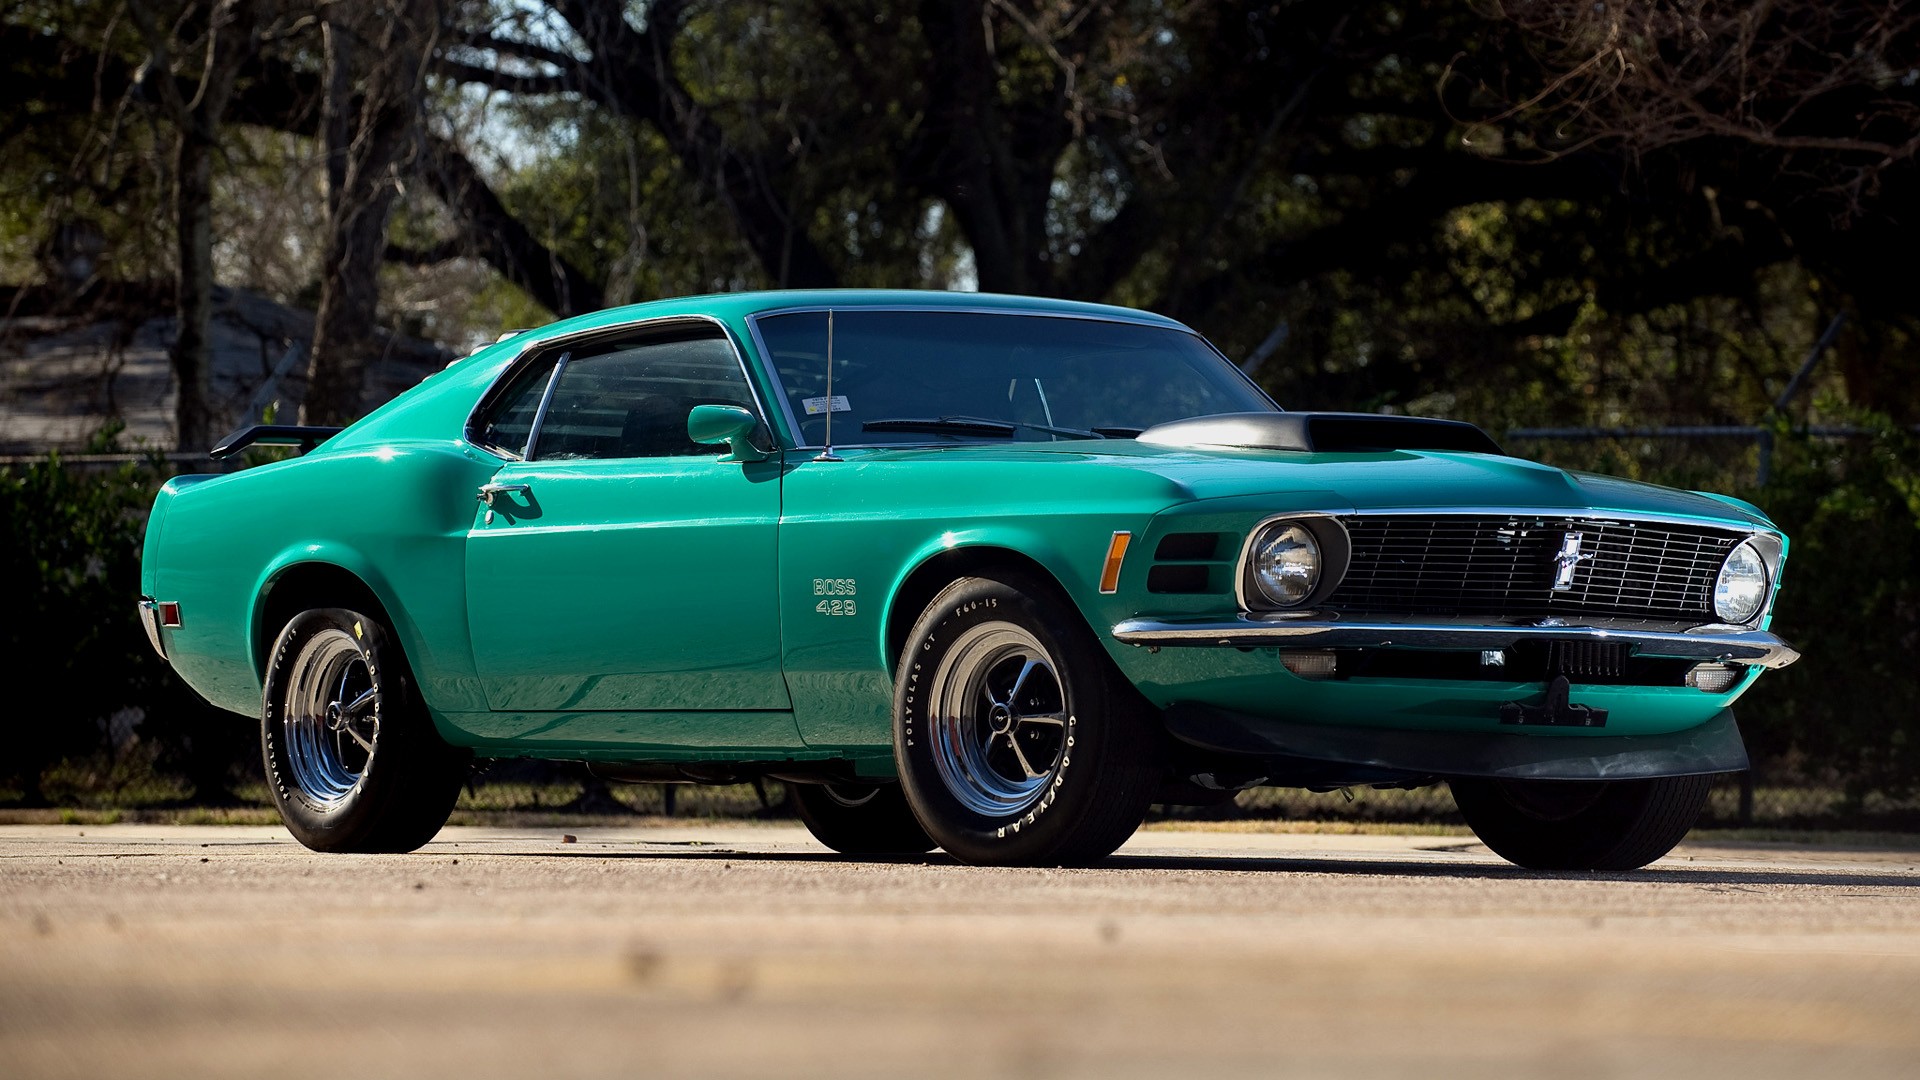 HD Classic Muscle Car Wallpaper Ing Gallery